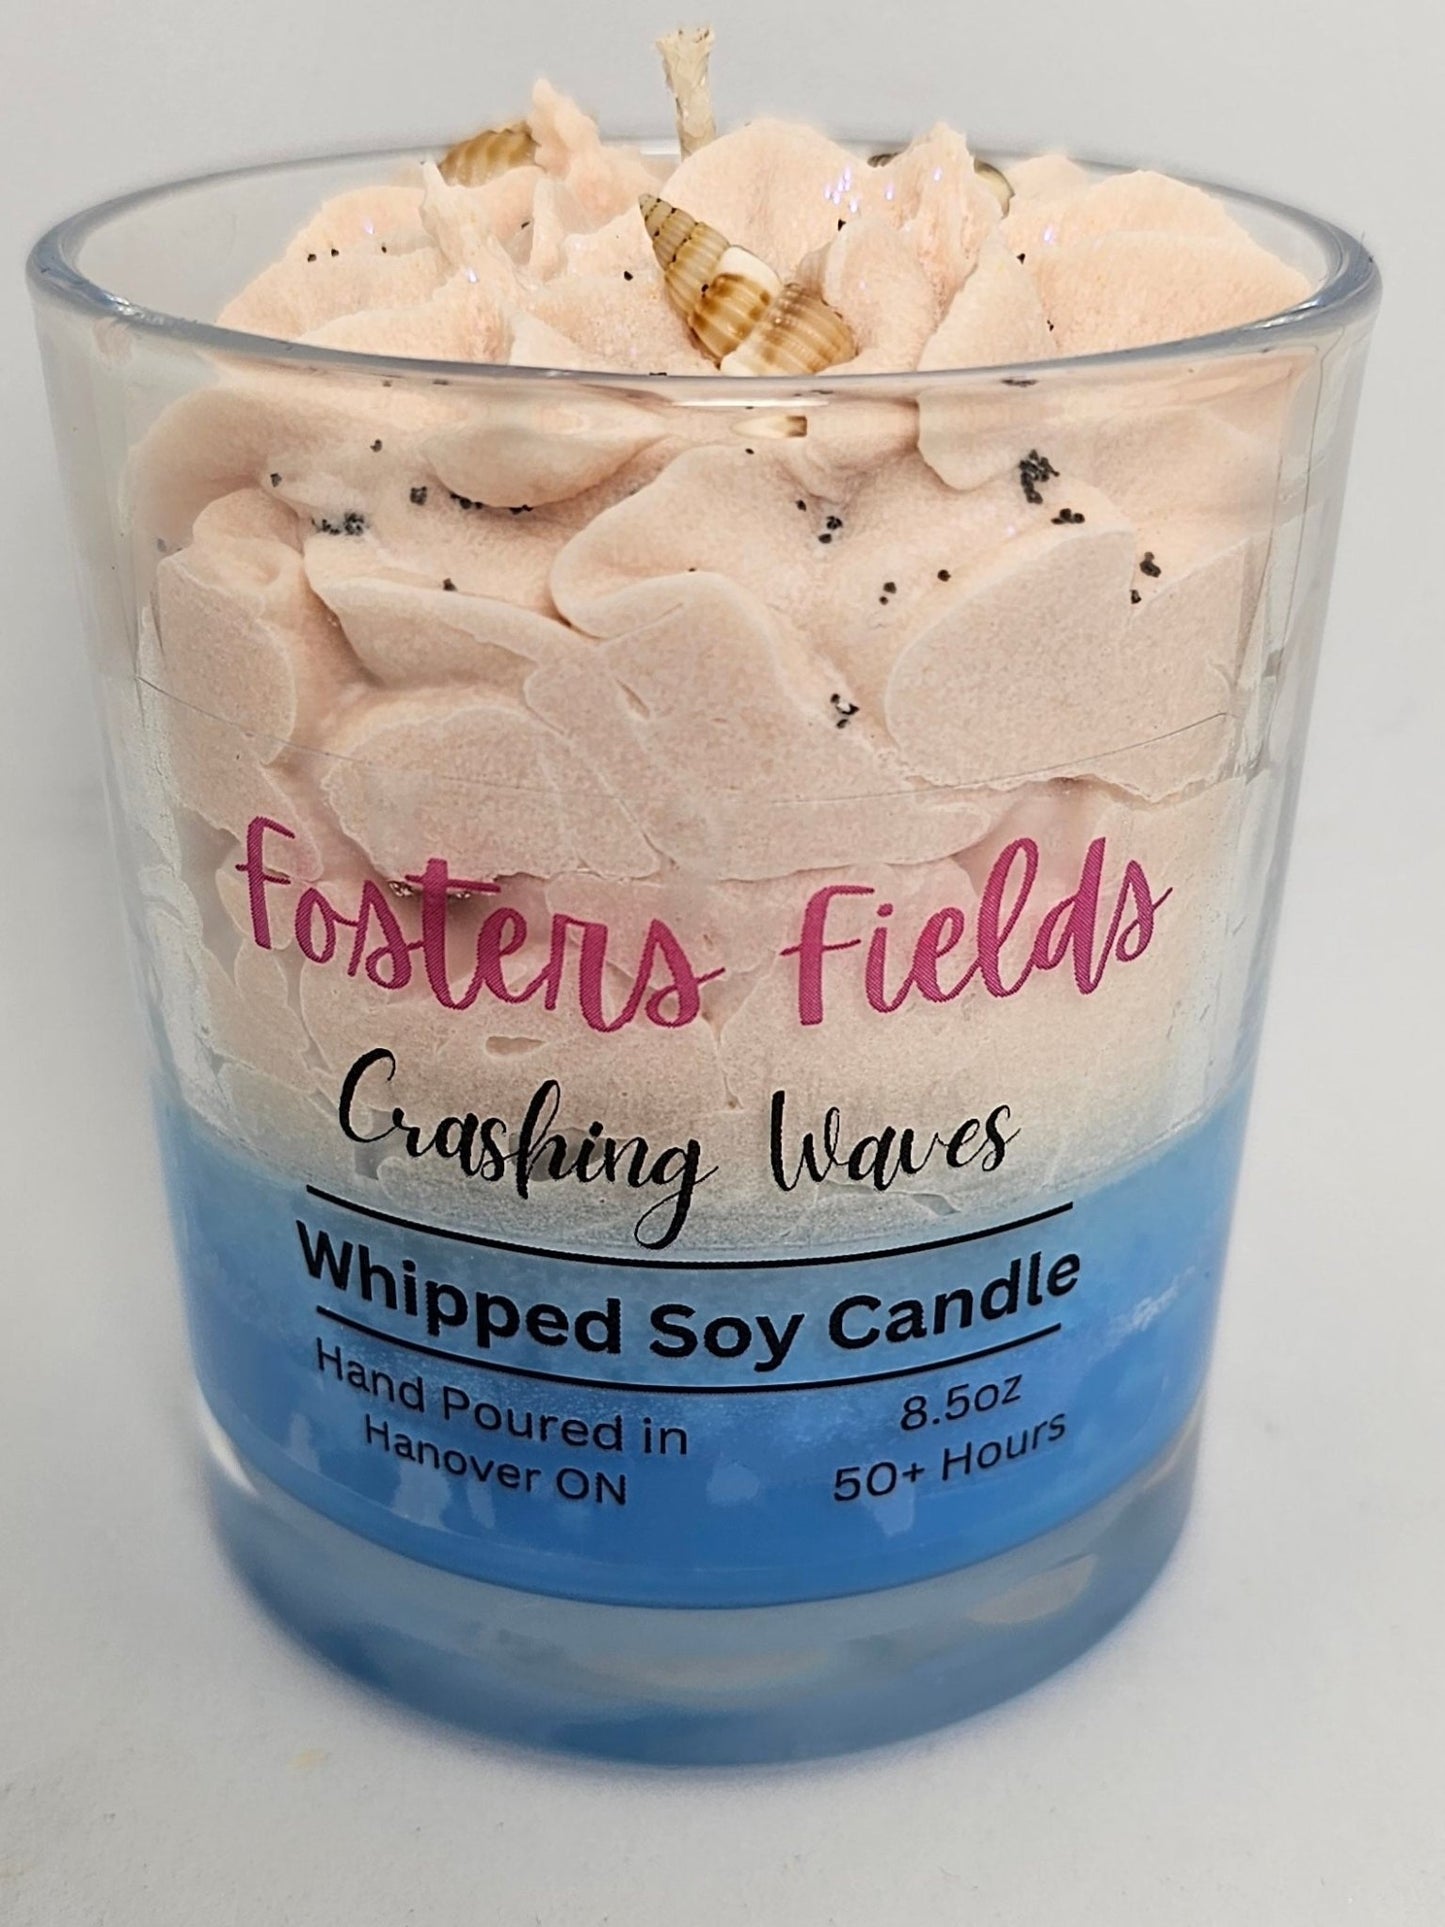 Crashing Waves Soy Candle - FostersFields